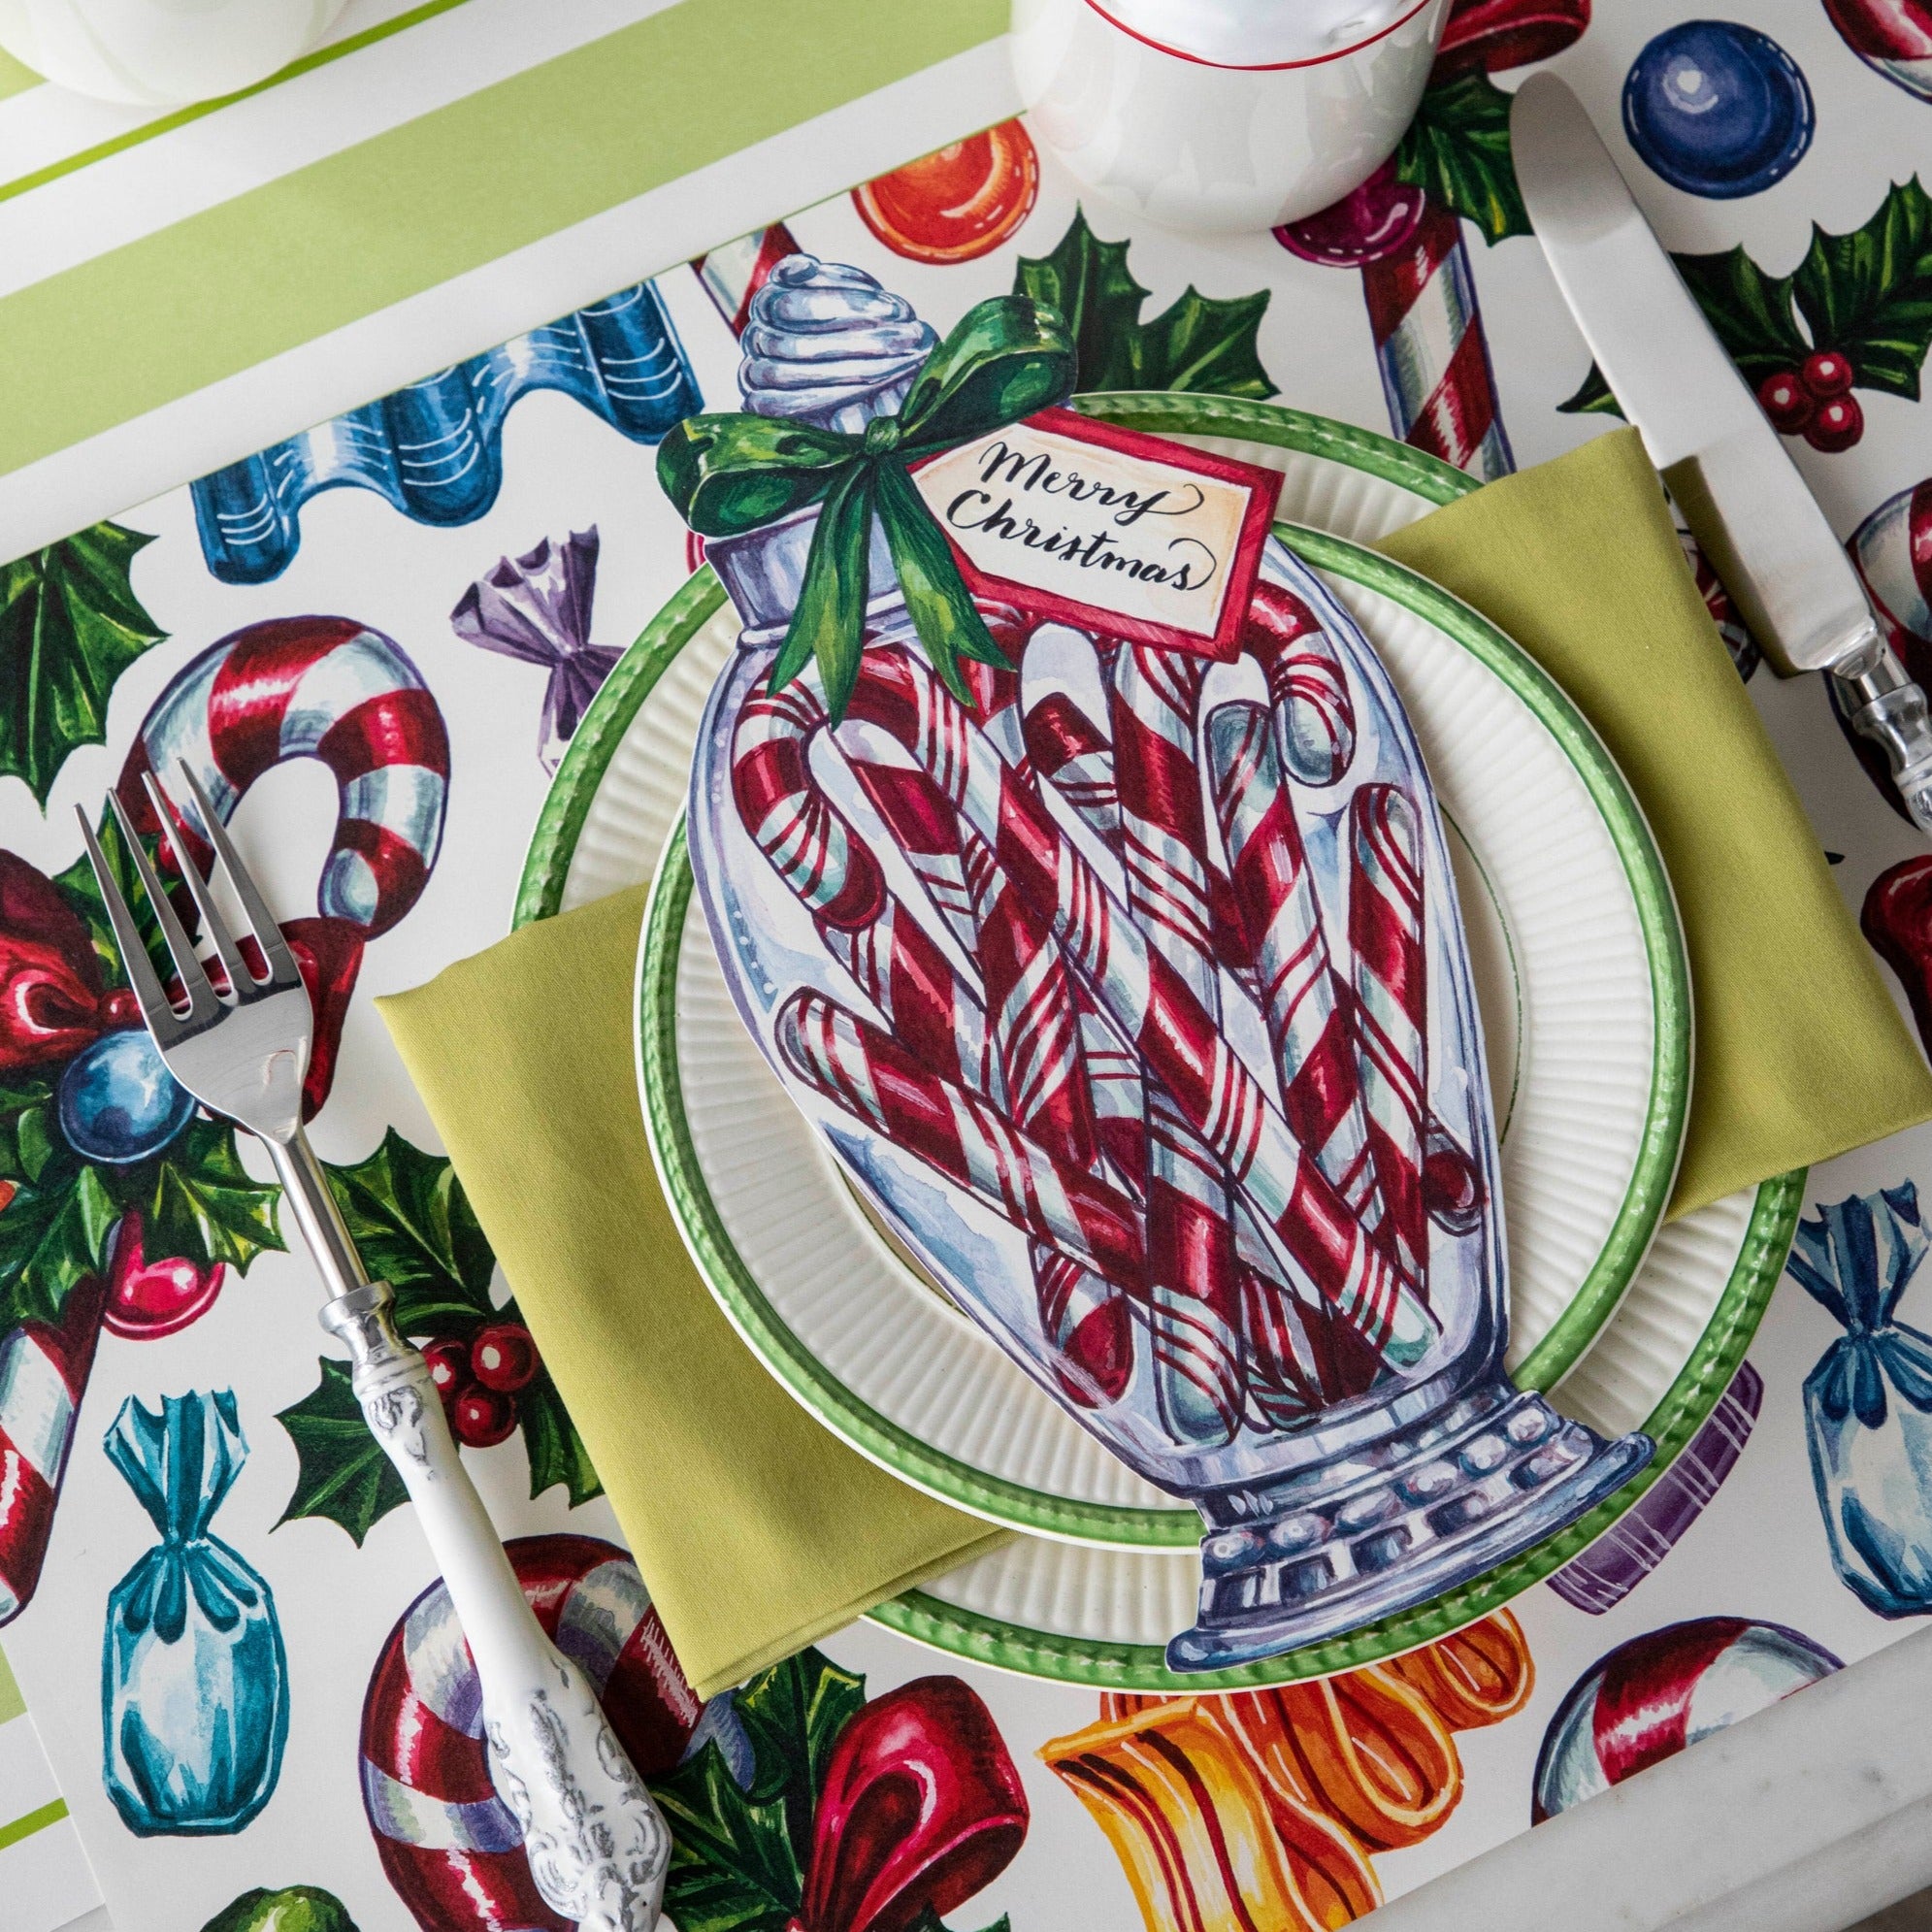 Close-up of the Candy Cane Shoppe Placemat under a festive Christmas-themed place setting.